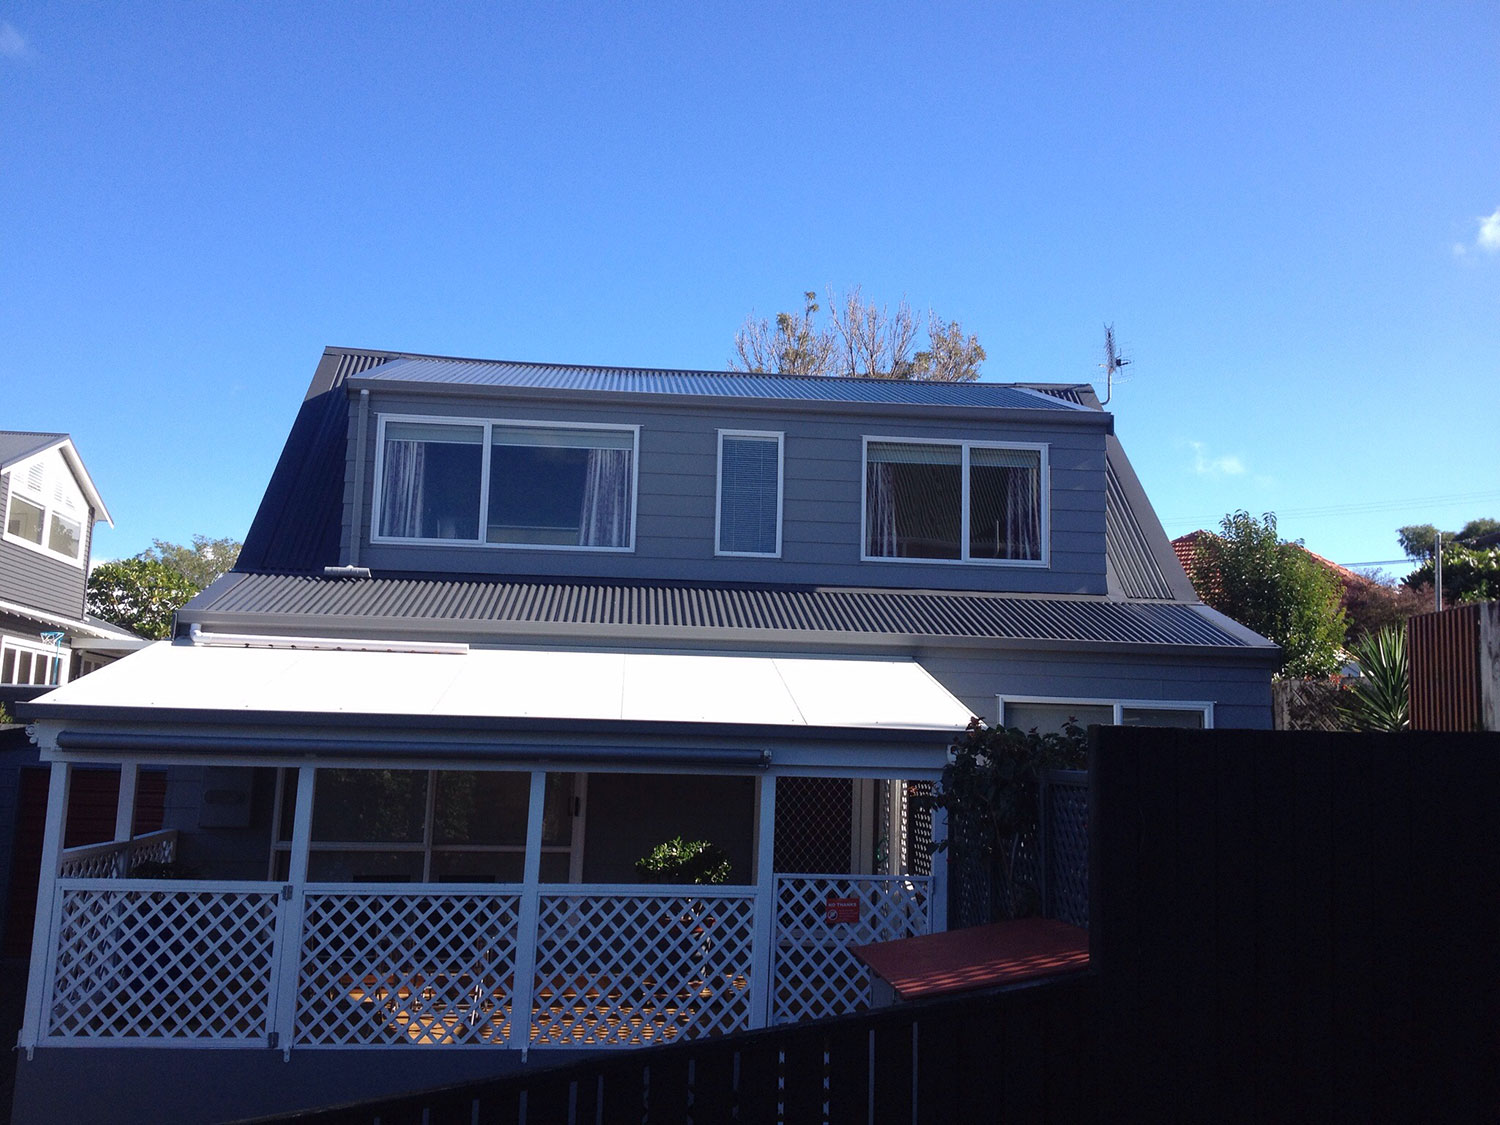 auckland roofing solutions services auckland and new zealand wide new roofs repair cladding and more Project gallery 68